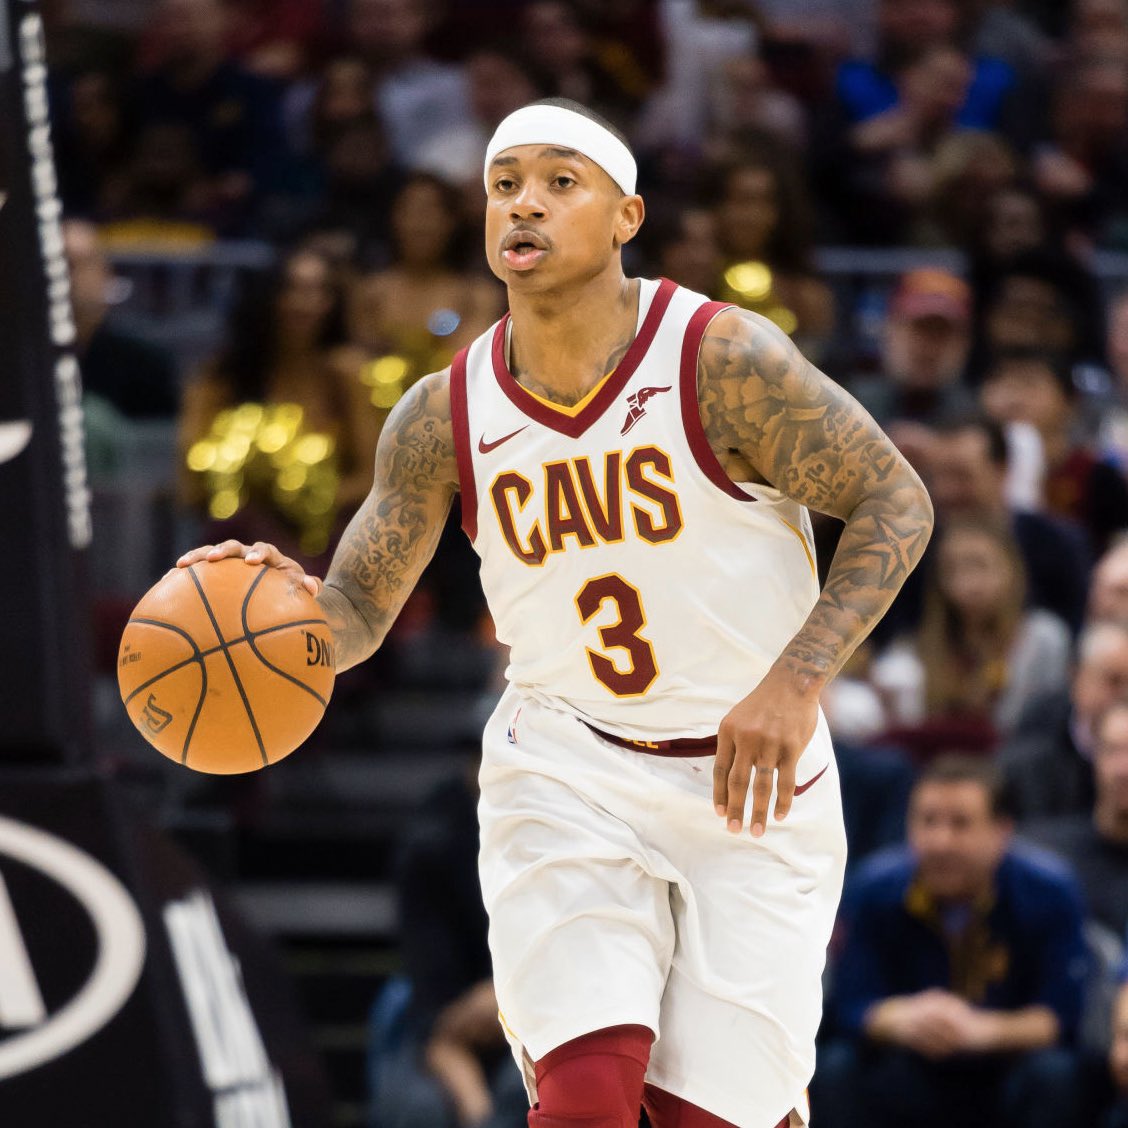 Thanks to today’s  @HoopsHabit article by  @Tony_Pesta about forgotten Cavs players, I’ll add Isaiah Thomas & Baron Davis (15 games apiece), Derrick Rose (16) and Deron Williams (24 games) to this thread.I won’t spoil the rest: https://hoopshabit.com/2020/03/08/15-nba-stars-forgot-played-cleveland-cavaliers/